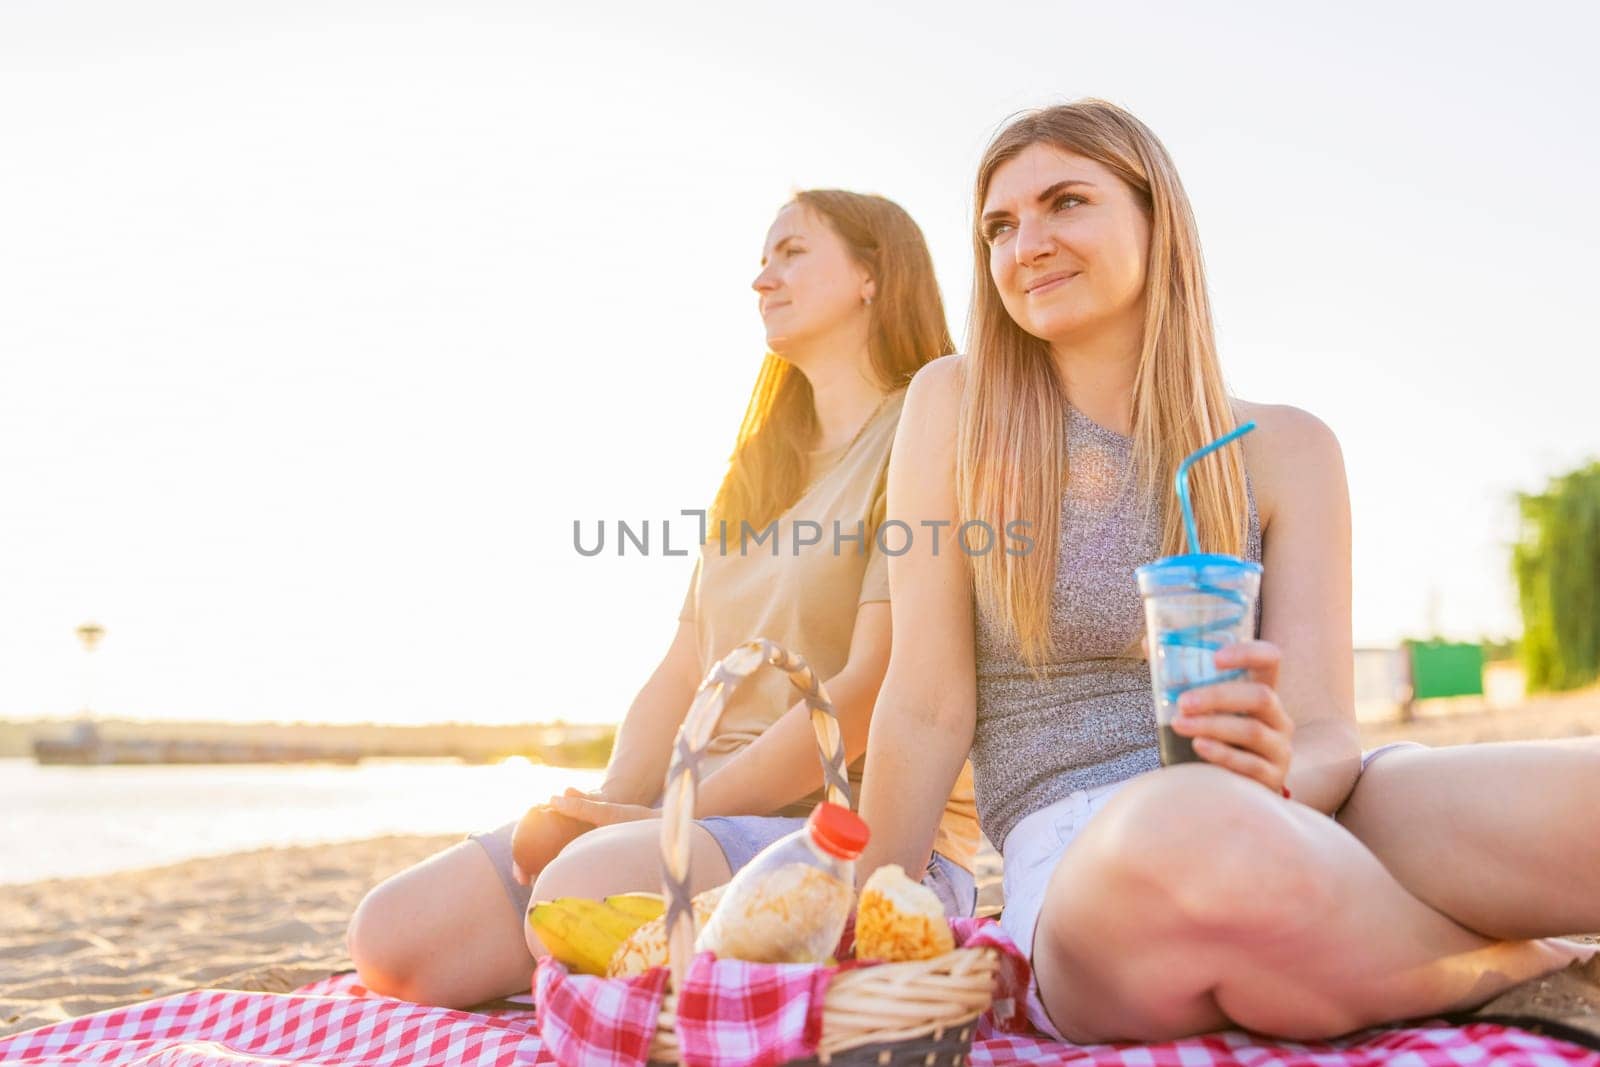 Two young beautiful women are having fun on beach and smiling. Have a carefree time with friends